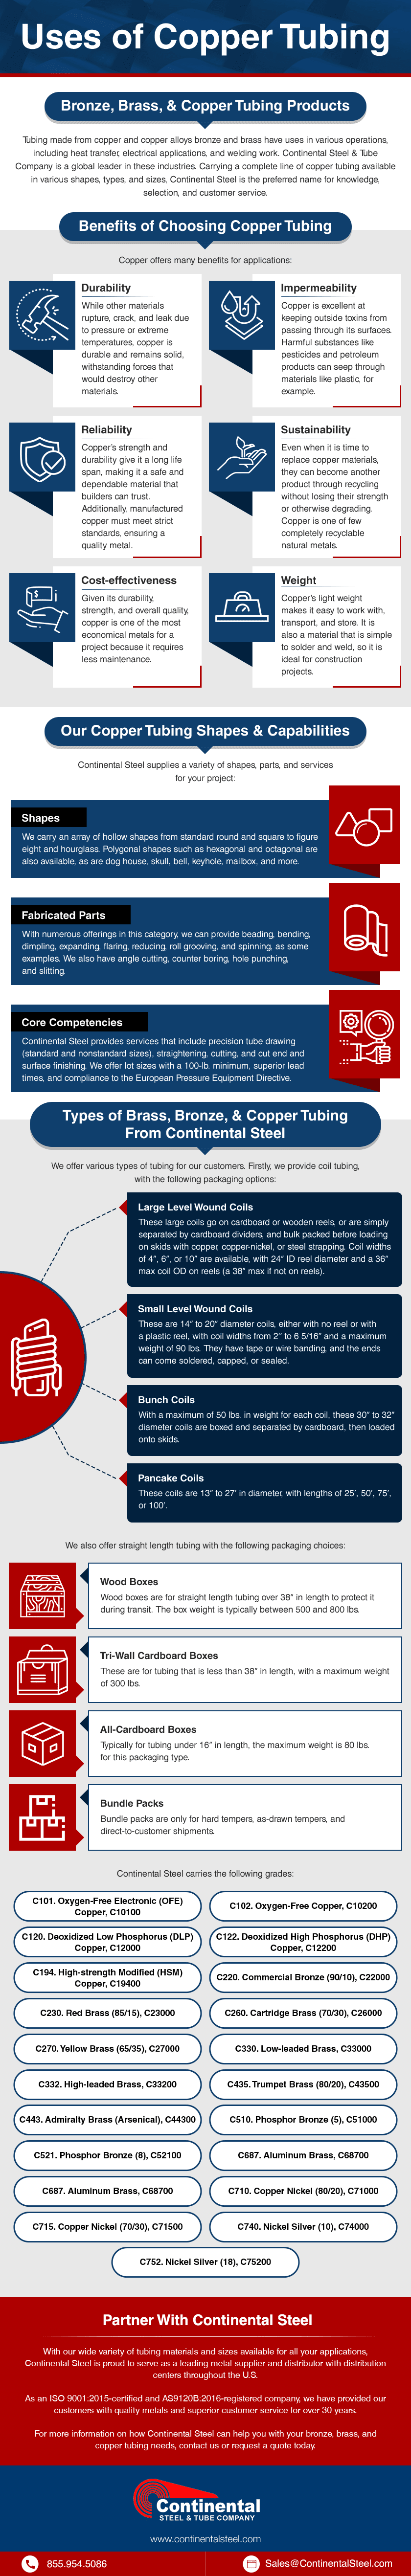 Uses of Copper Tubing